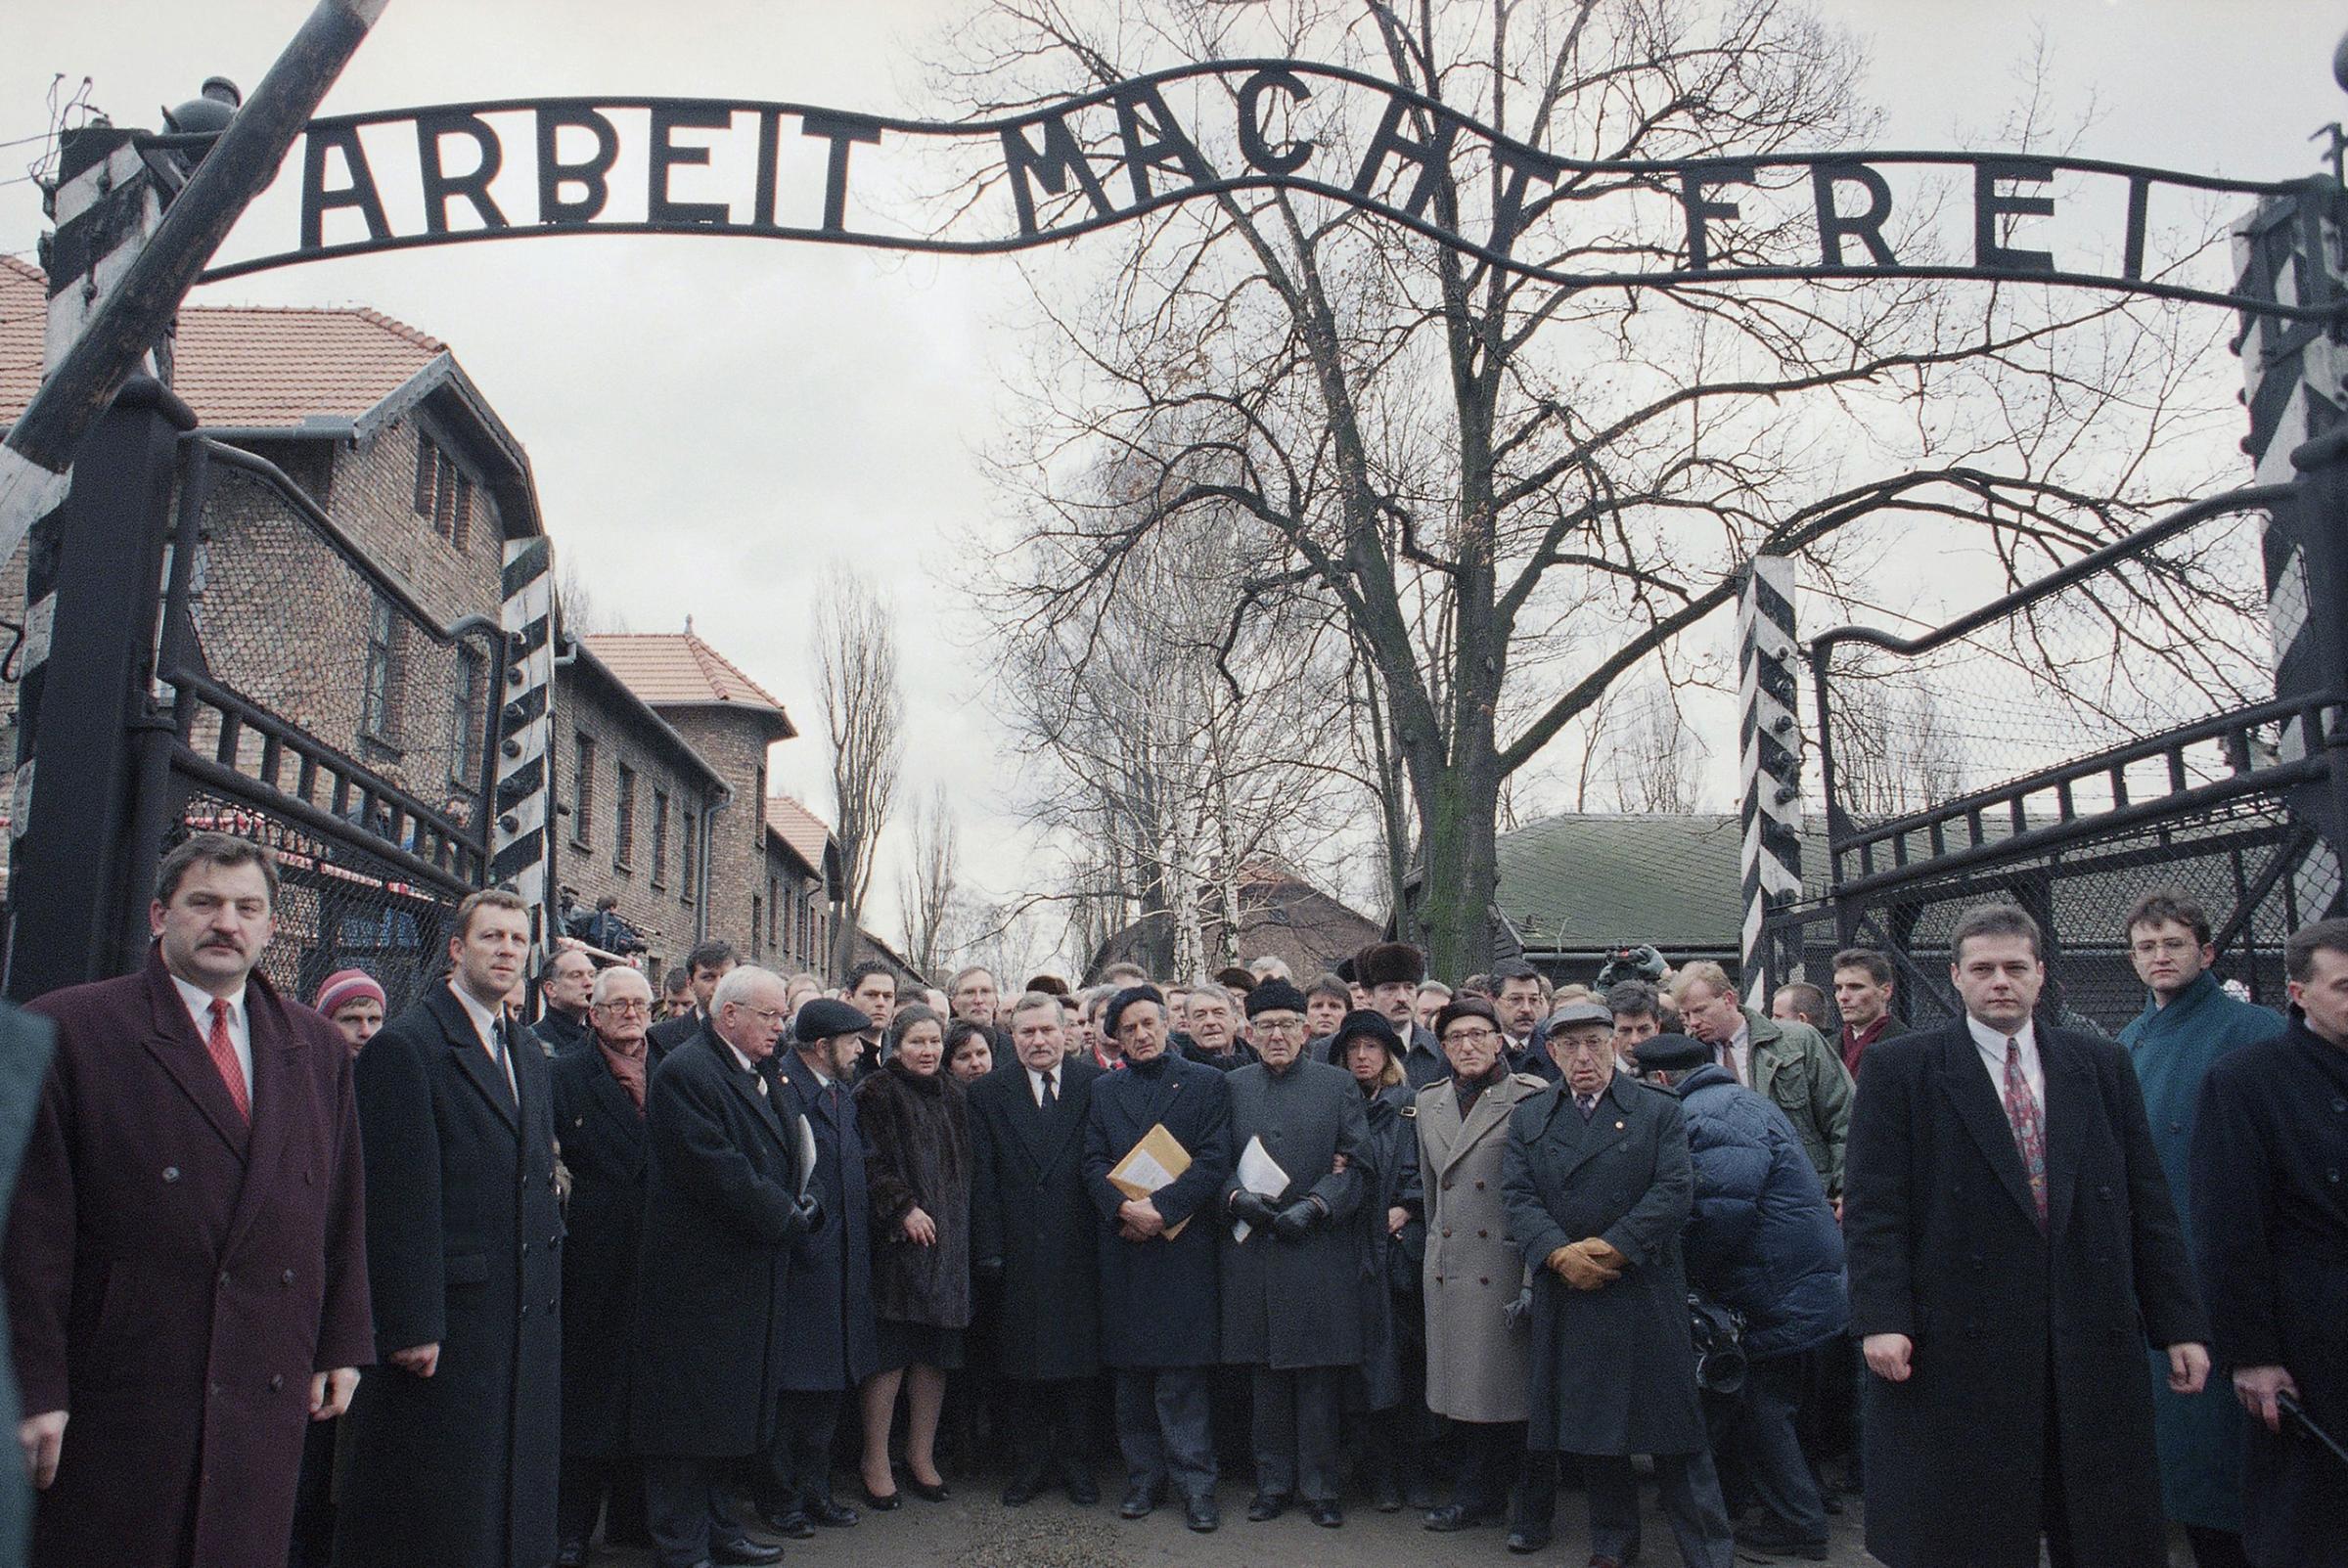 Delegates stand at the main entrance of the Auschwitz concentration camp, after the official ceremony of the 50th anniversary of the camp's liberation by the Red Army, in Poland on Jan. 27, 1995.